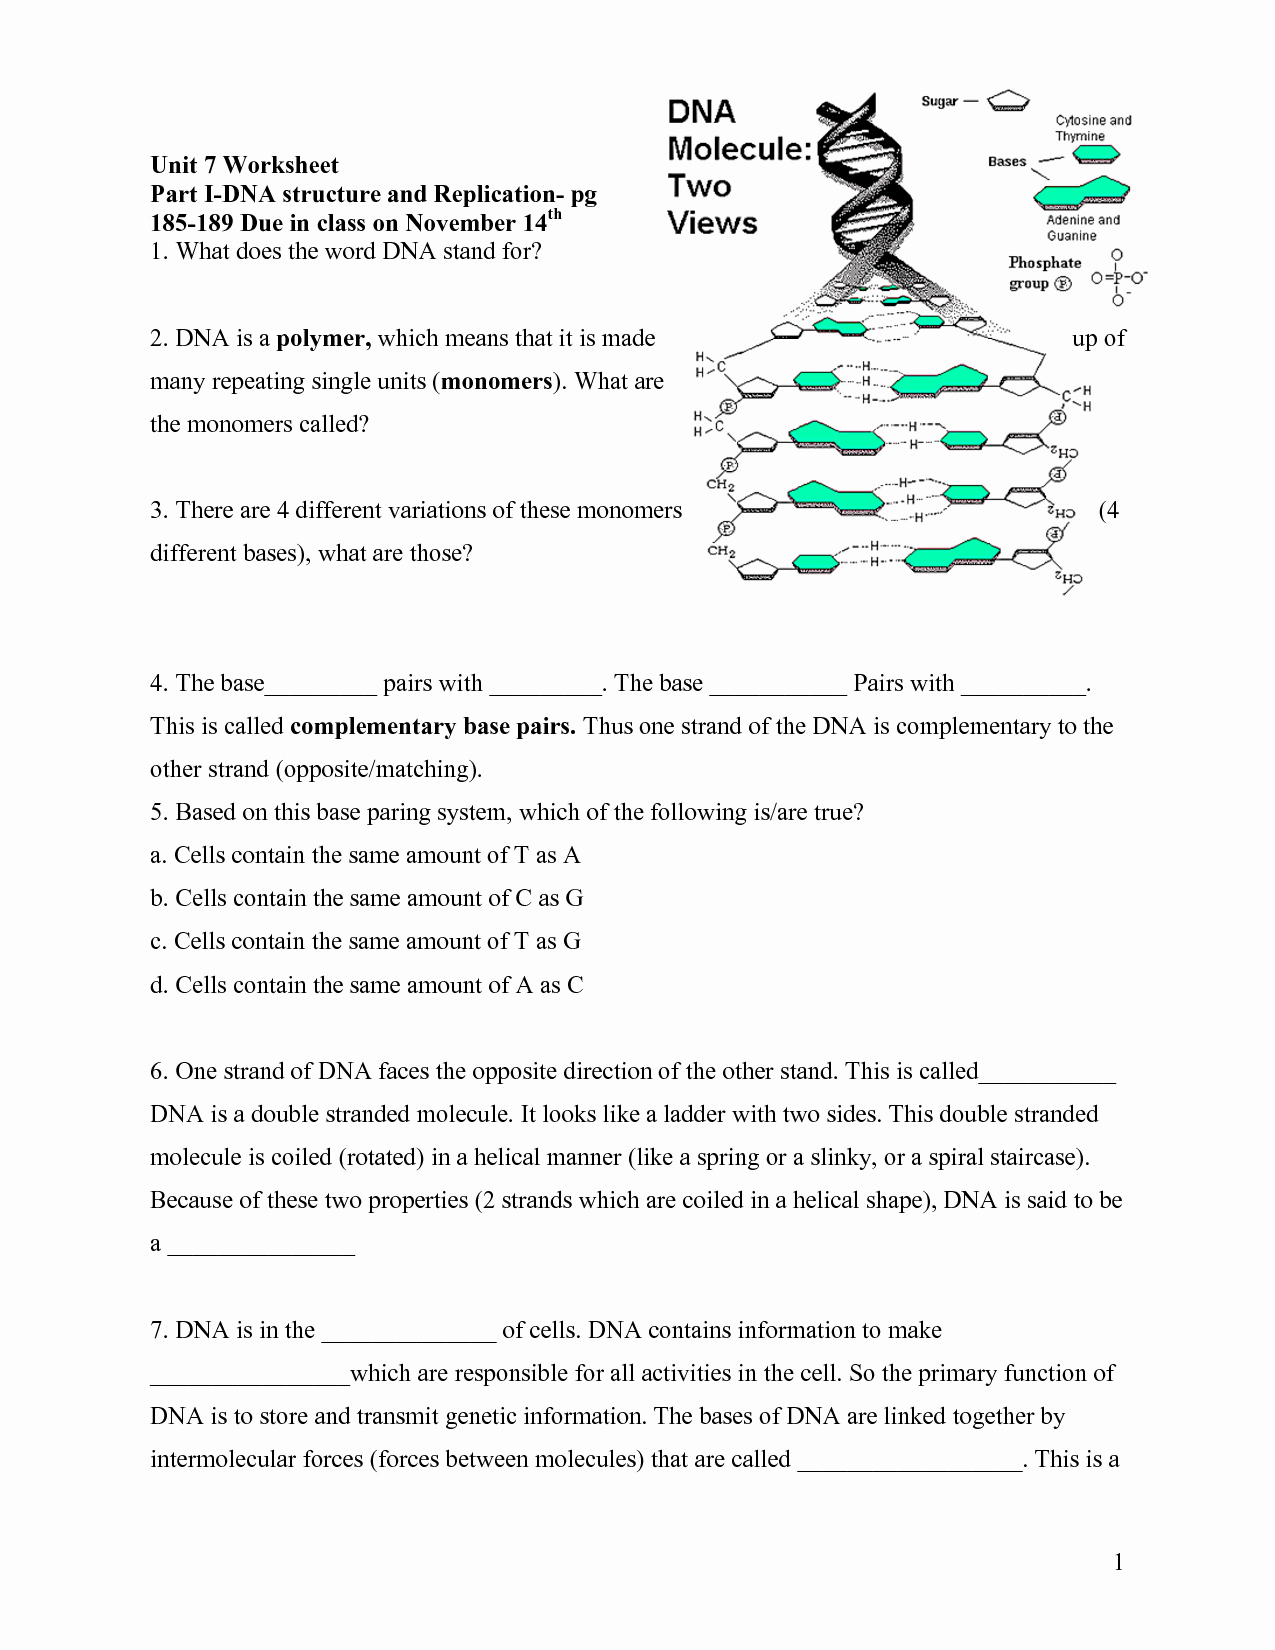 Dna Structure and Replication Worksheet Best Of 19 Best Of Dna Replication Structure Worksheet and